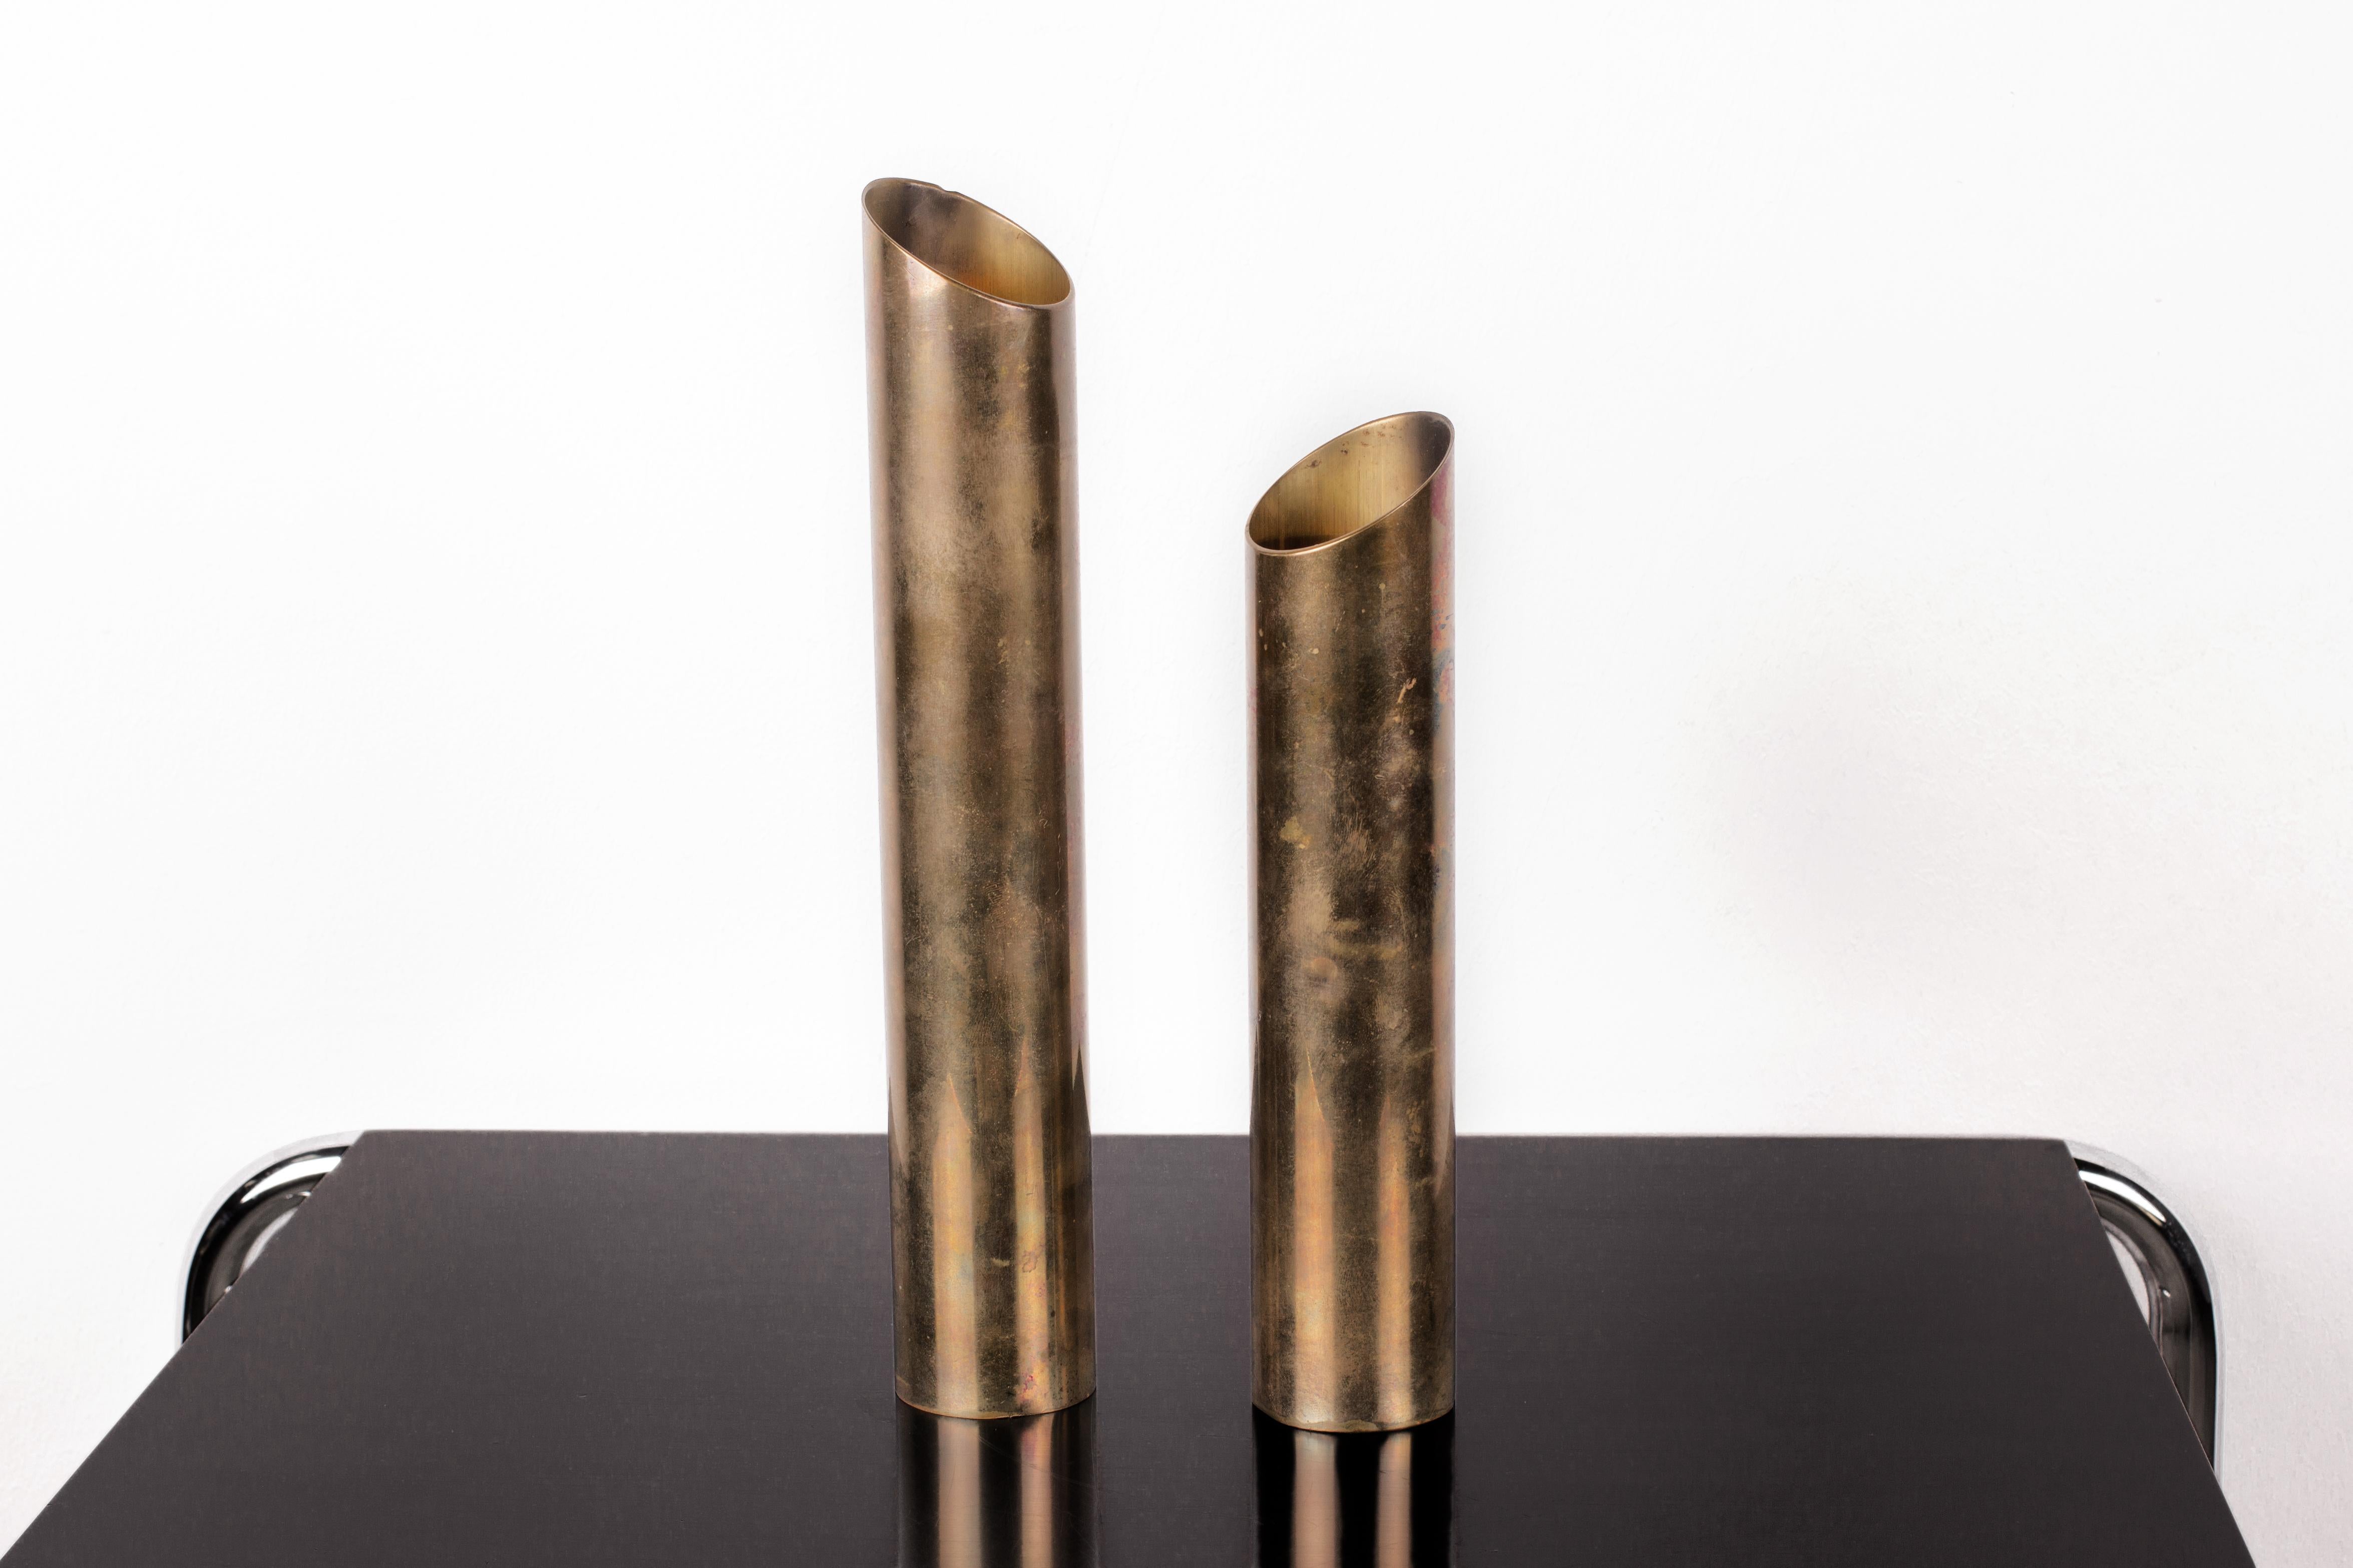 Elegant, minimalist Mid-Century Modern patinated brass candlestick holders from Scandinavia. Tubular form with 45 degree cut. Can either completely envelope a tea candle so that only the soft light bounces out off the inner brass tubing.